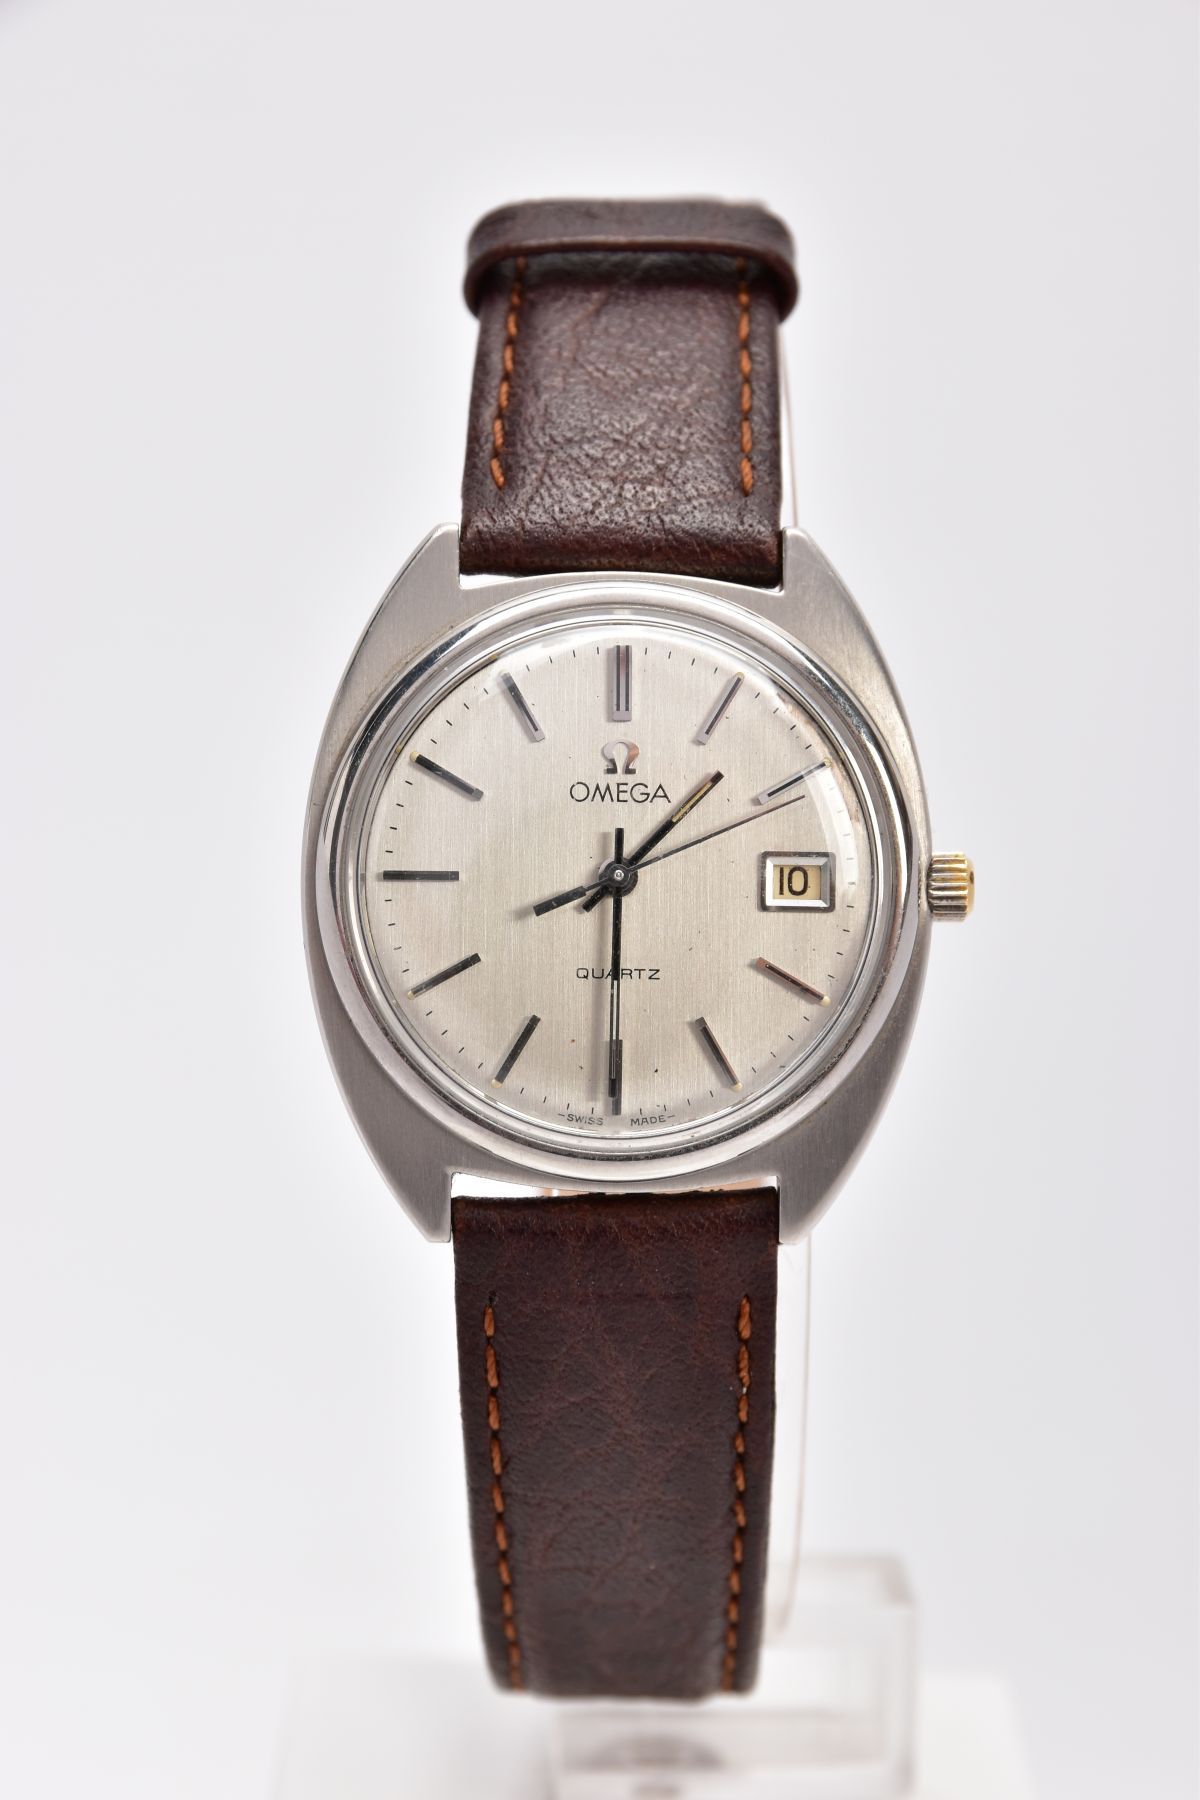 A GENTLEMAN'S OMEGA WRISTWATCH WITH BOX, the quartz watch with circular face, baton markers, date